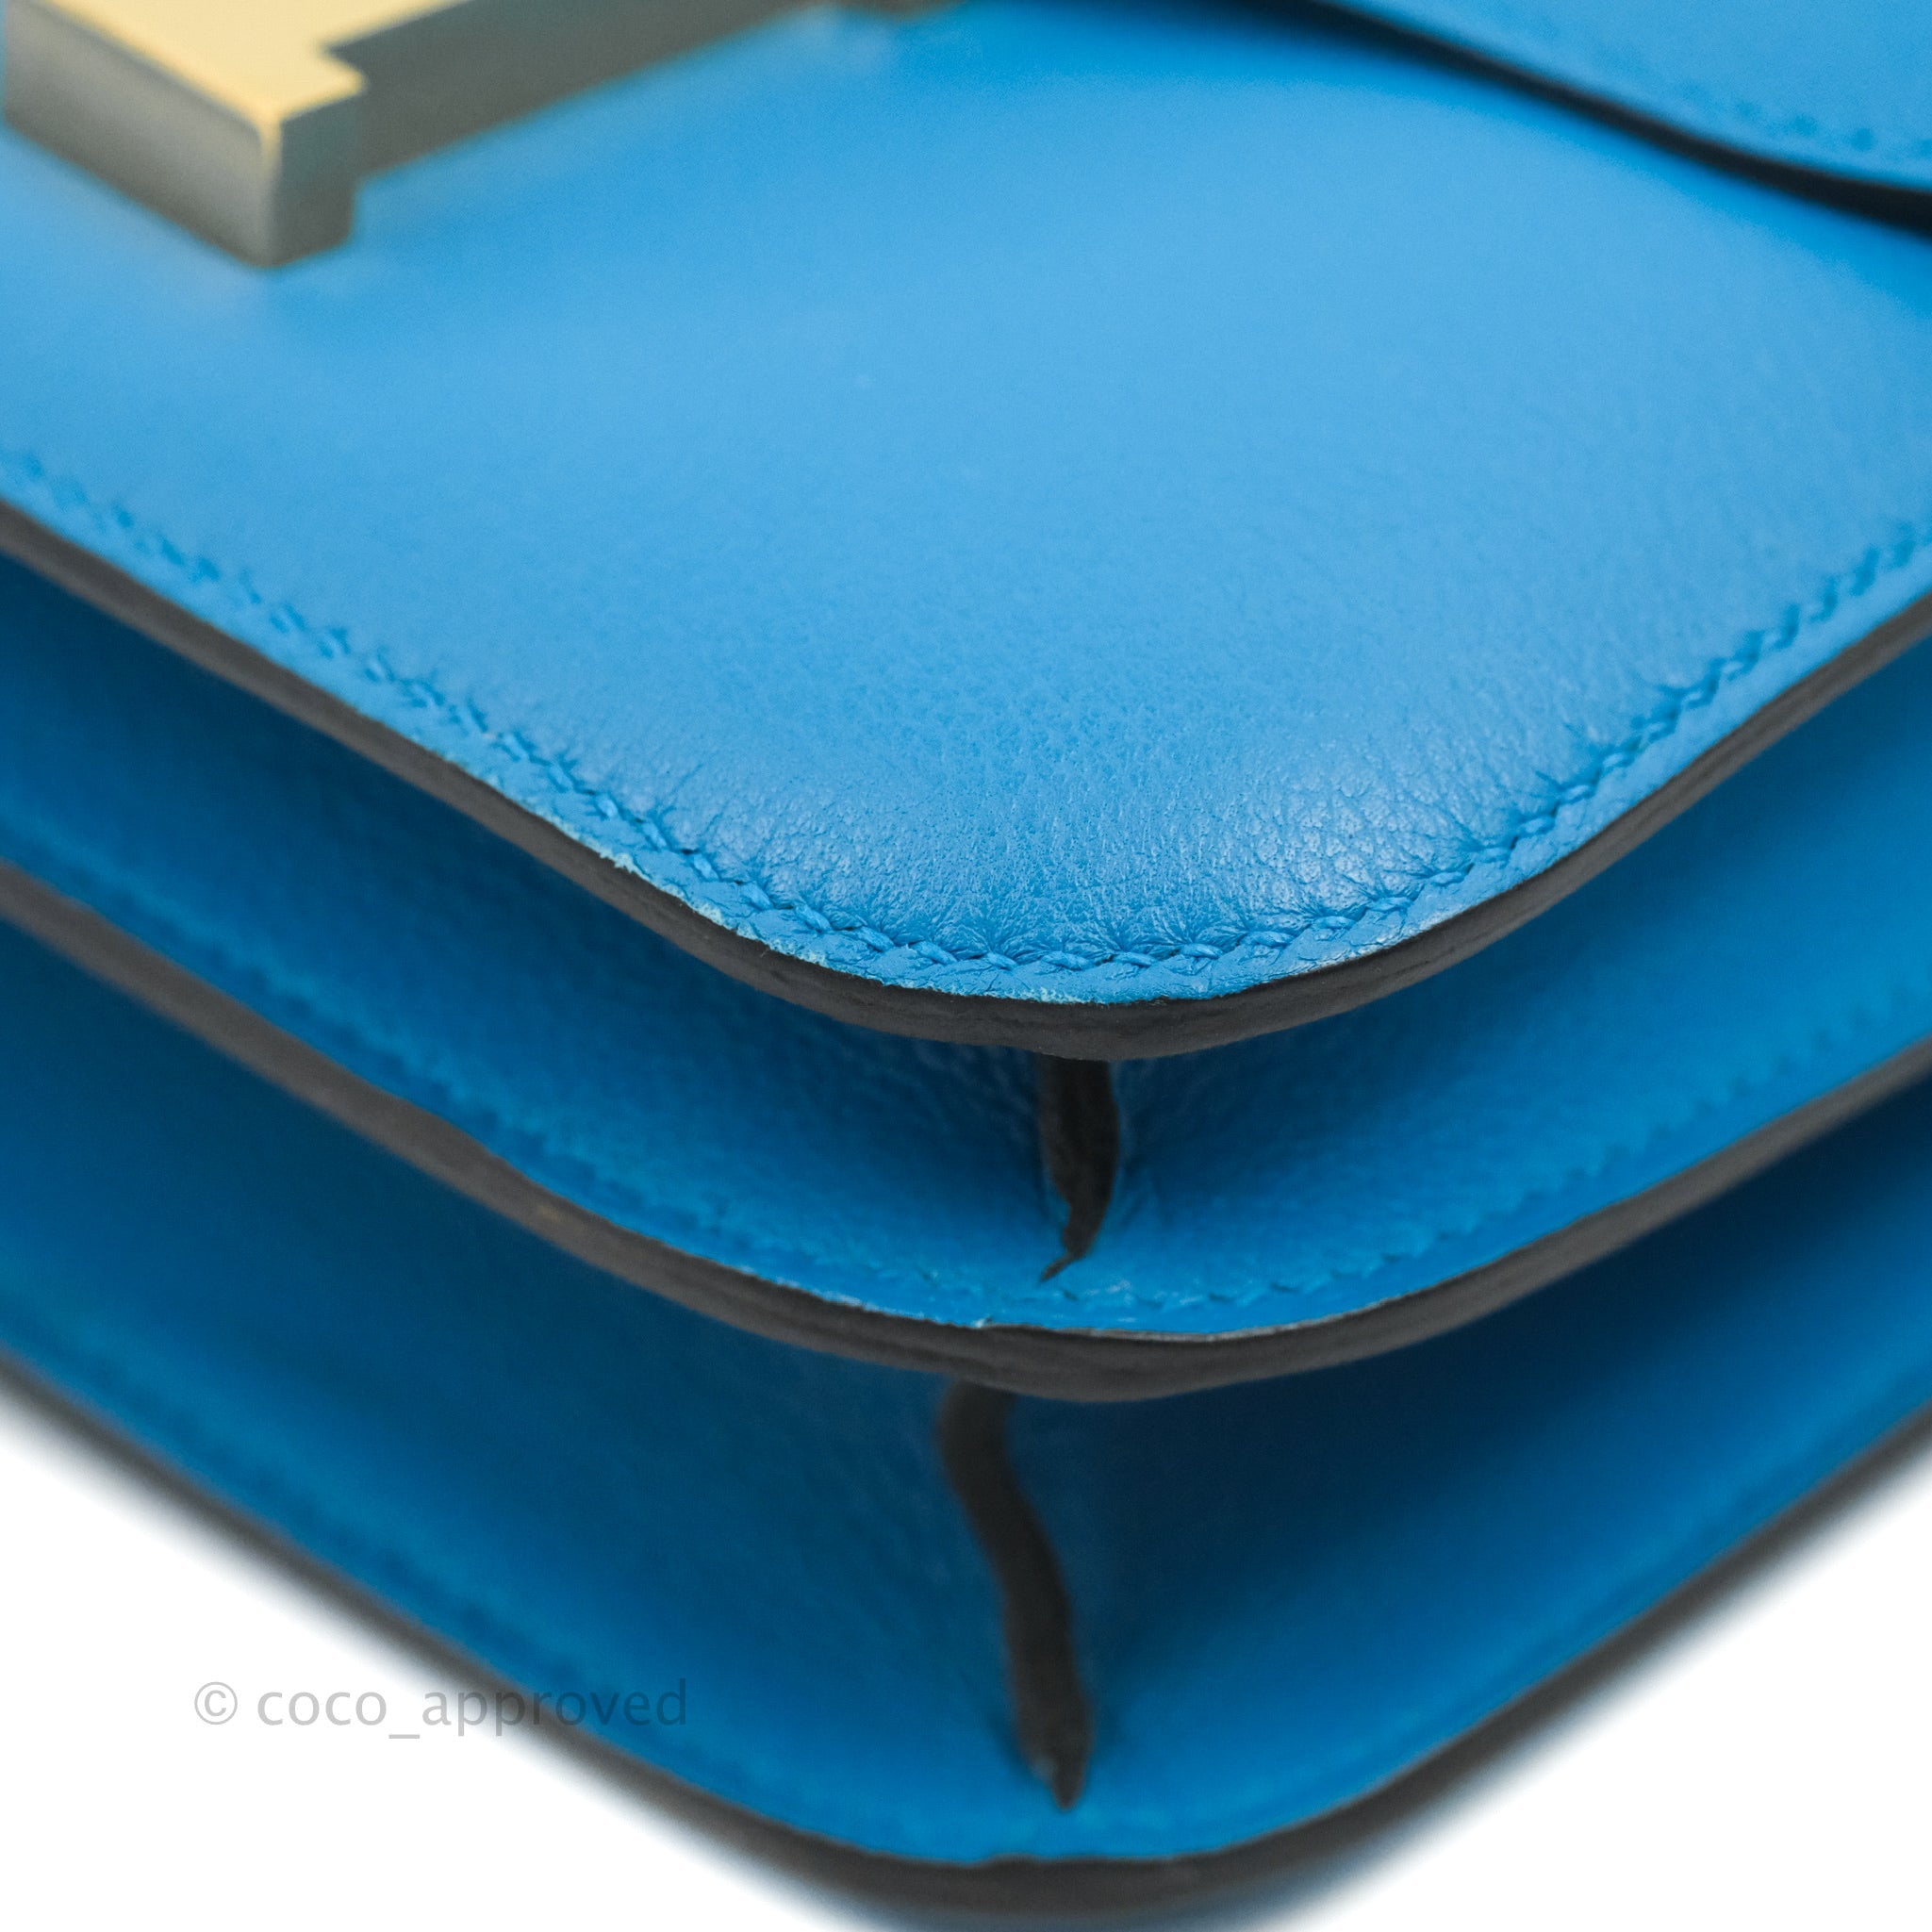 NEW Hermes Constance Long To Go wallet Clutch Bag Blue Freda leather gold  GHW